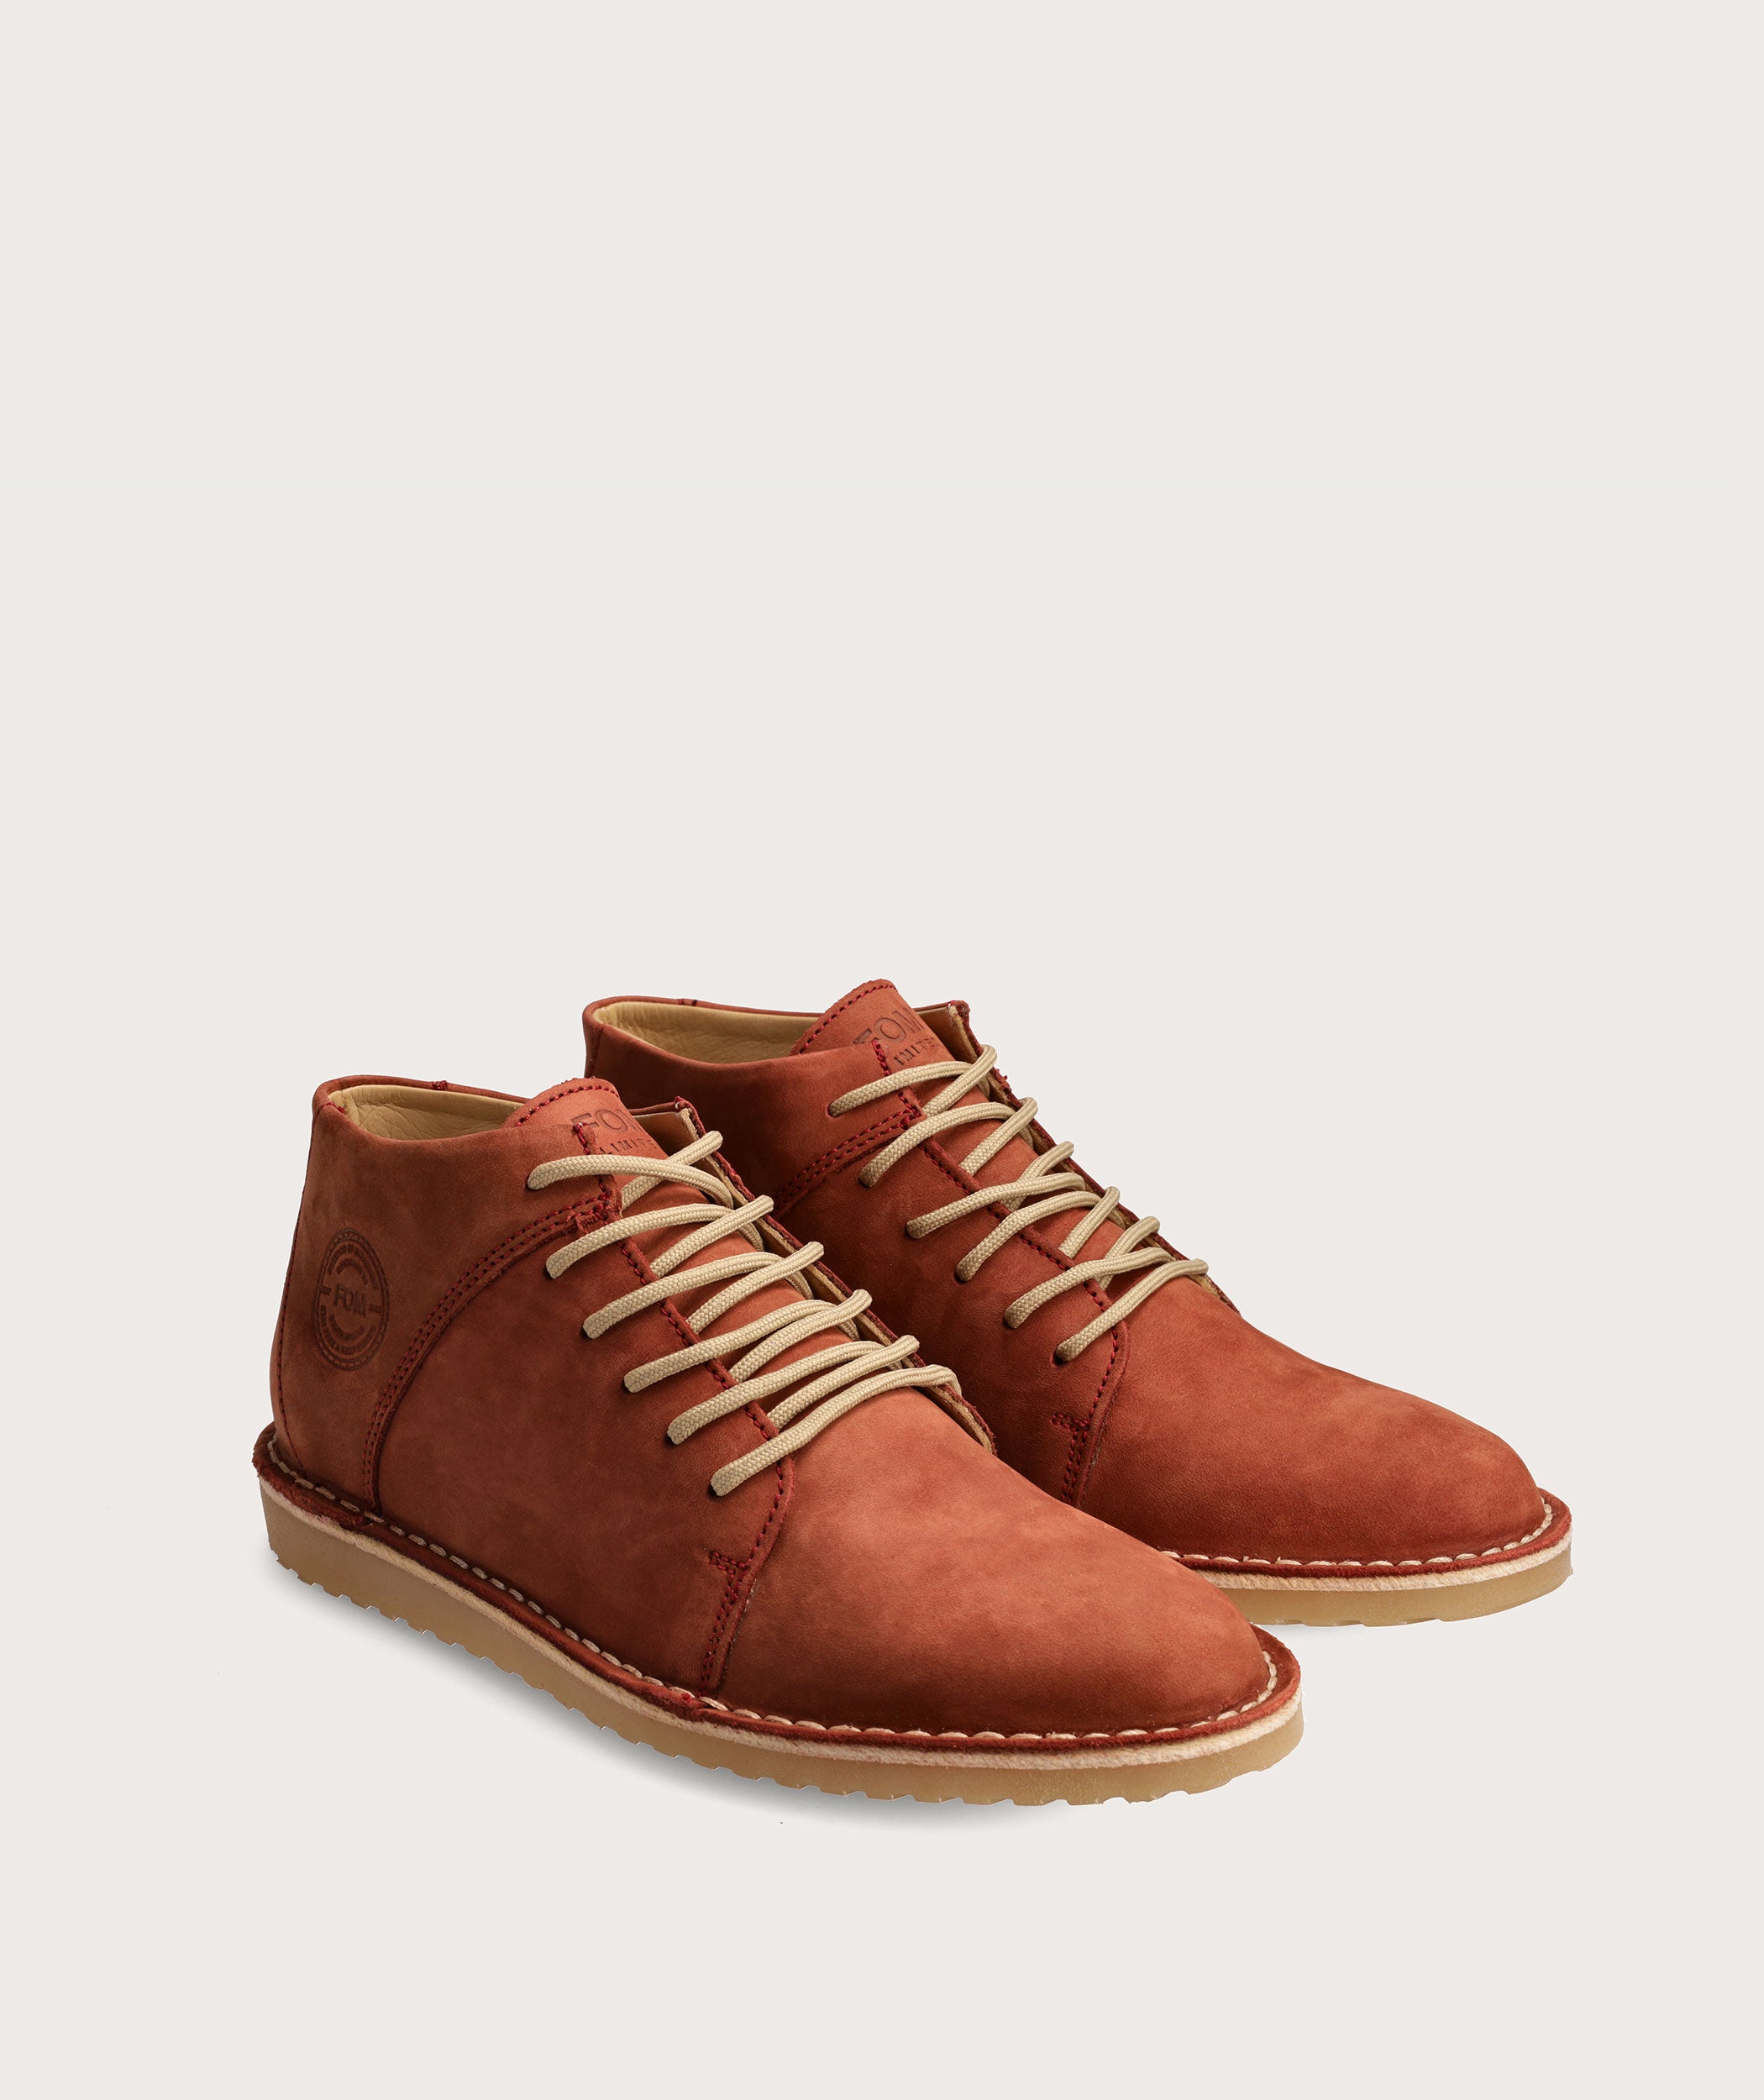 FOM Vellies Standard - Rust (Limited Edition)